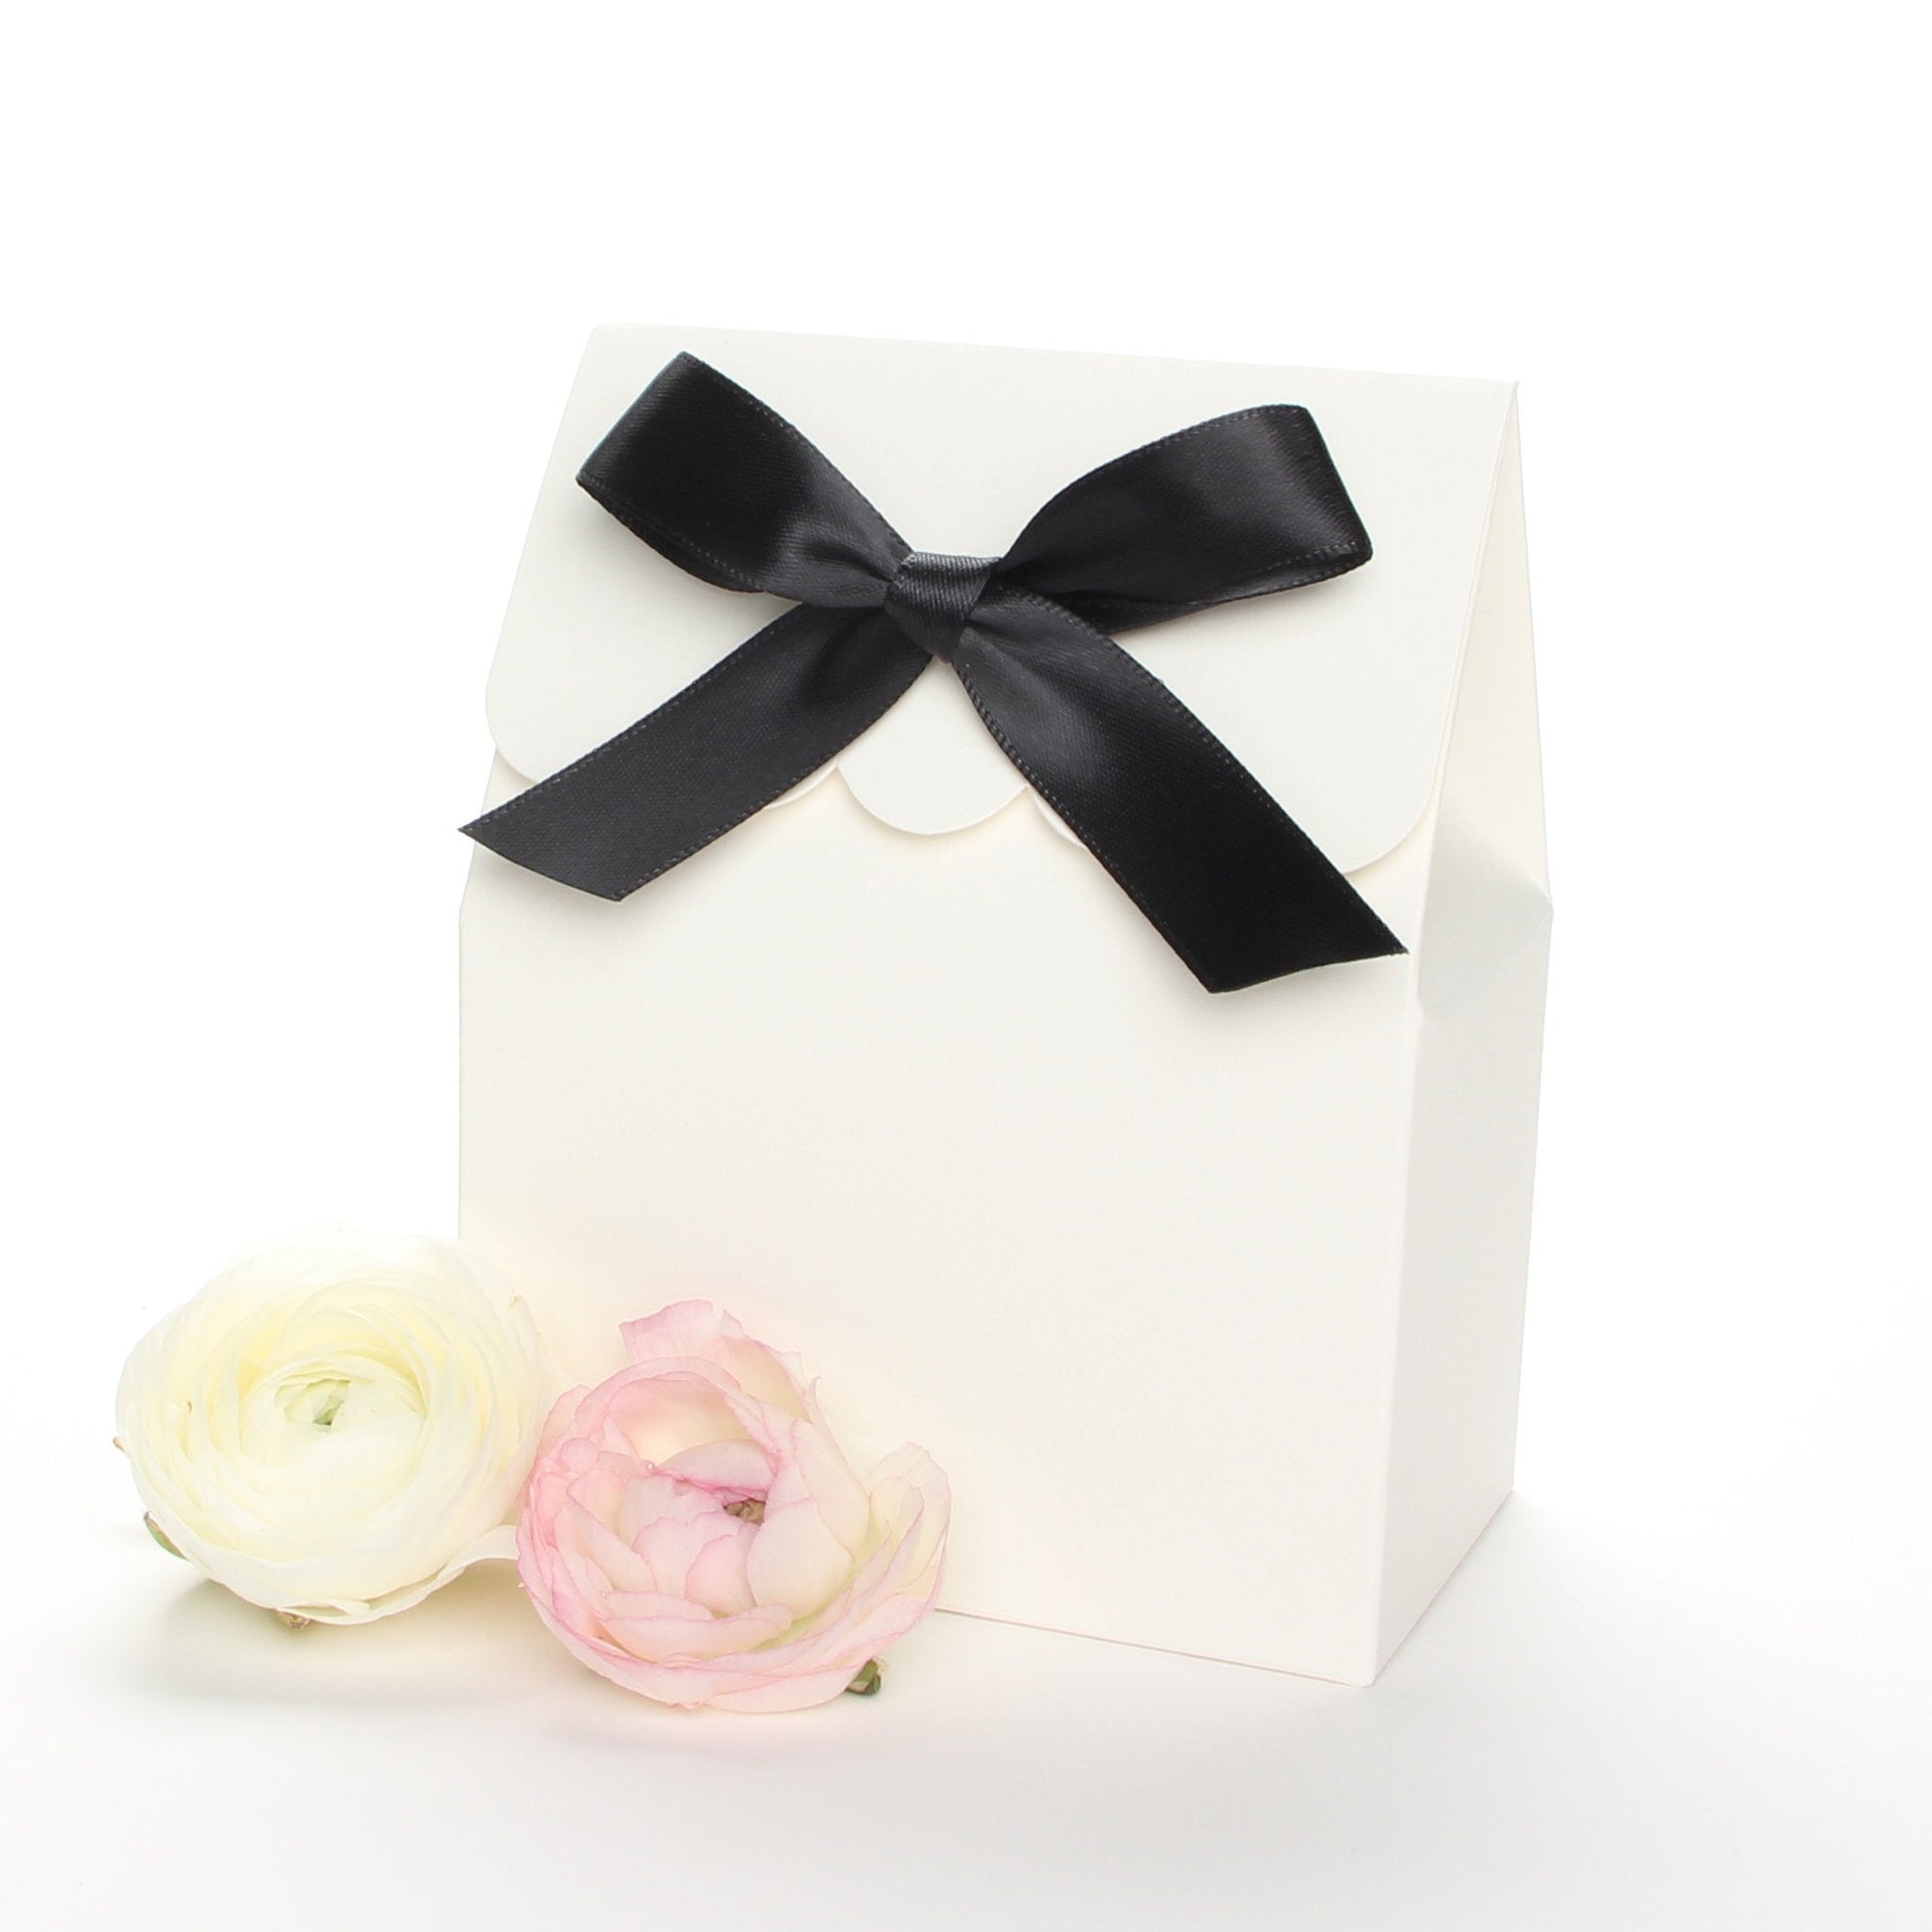 Lux Party’s ivory favor box with a scalloped edge and a black satin bow next to pink and white ranunculus flowers.